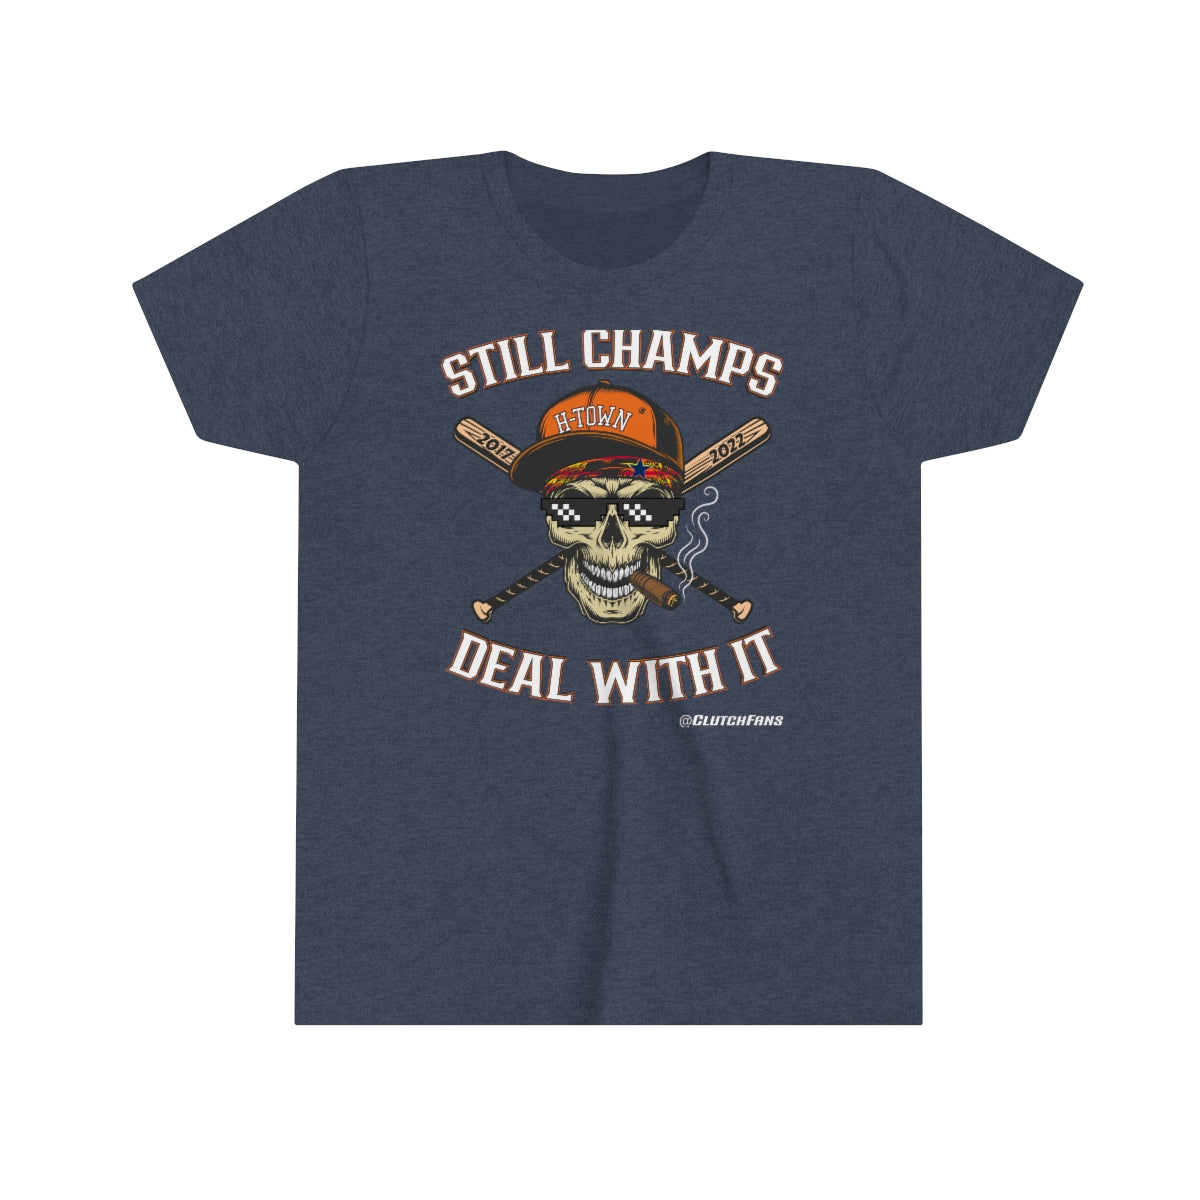 STILL CHAMPS: Deal With It! - YOUTH Tee